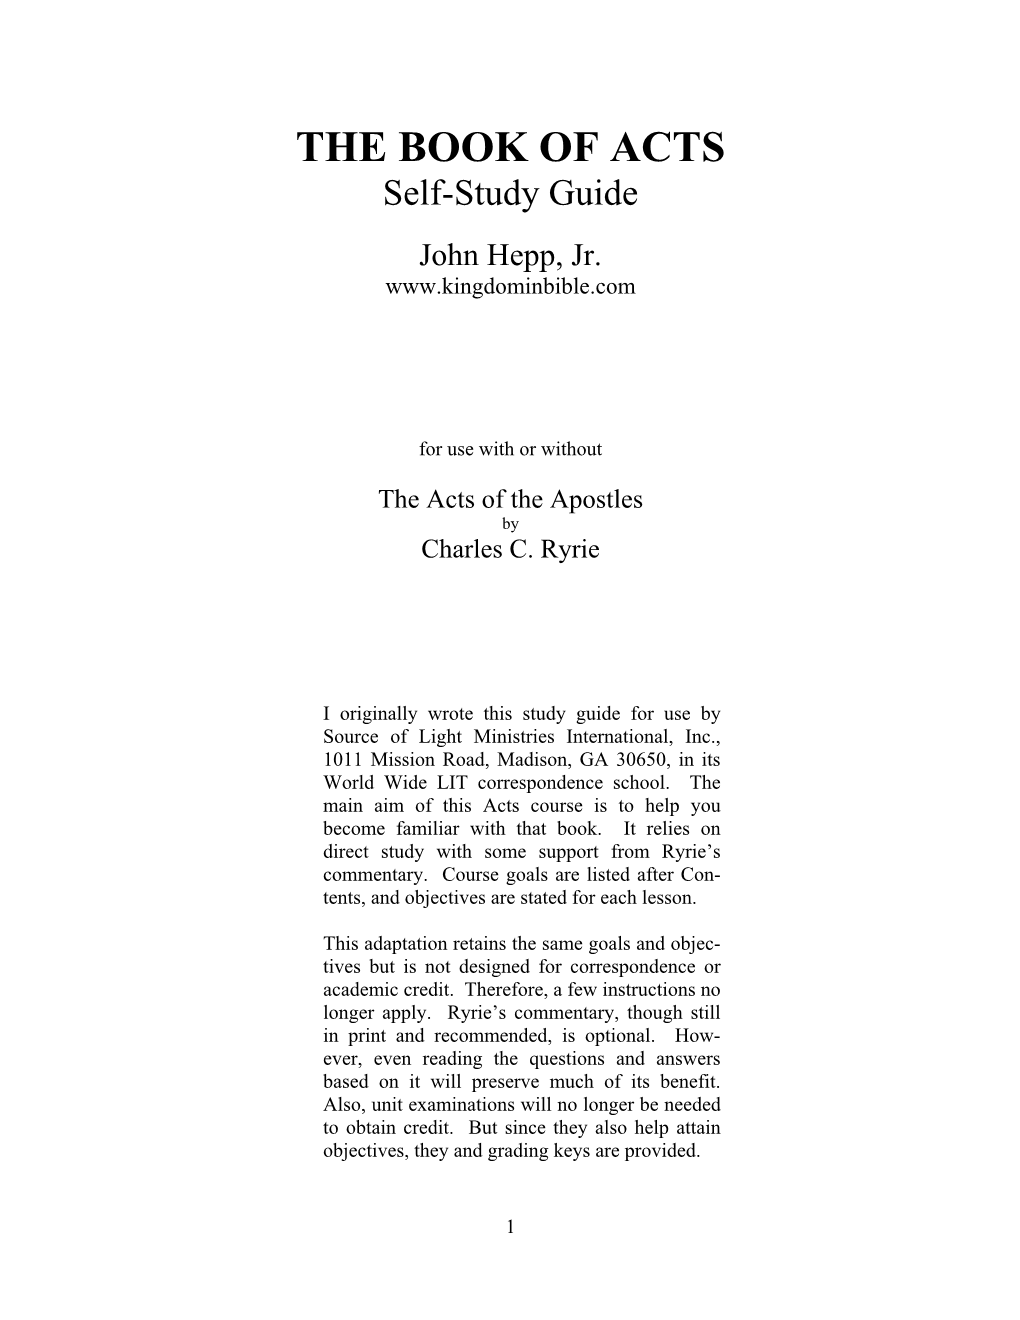 THE BOOK of ACTS Self-Study Guide